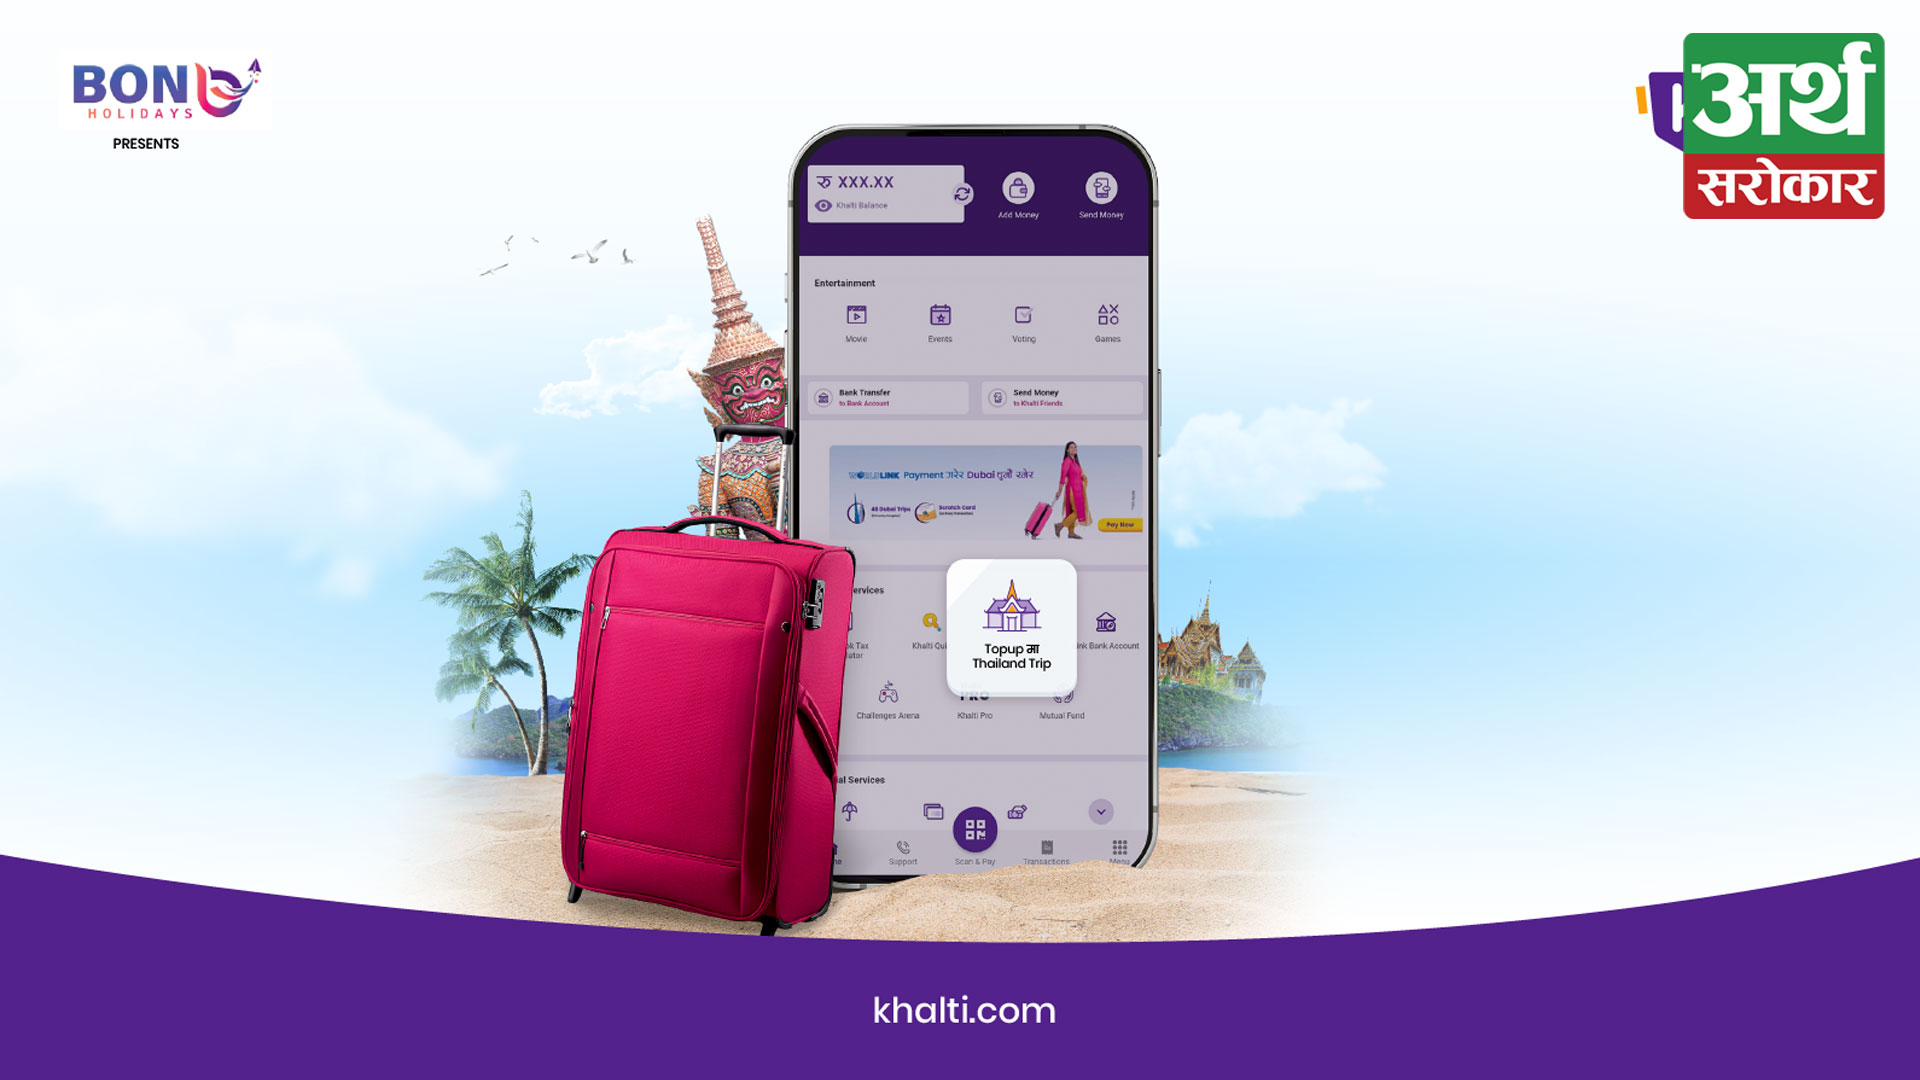 Khalti offers a trip to Thailand for Rs. 50